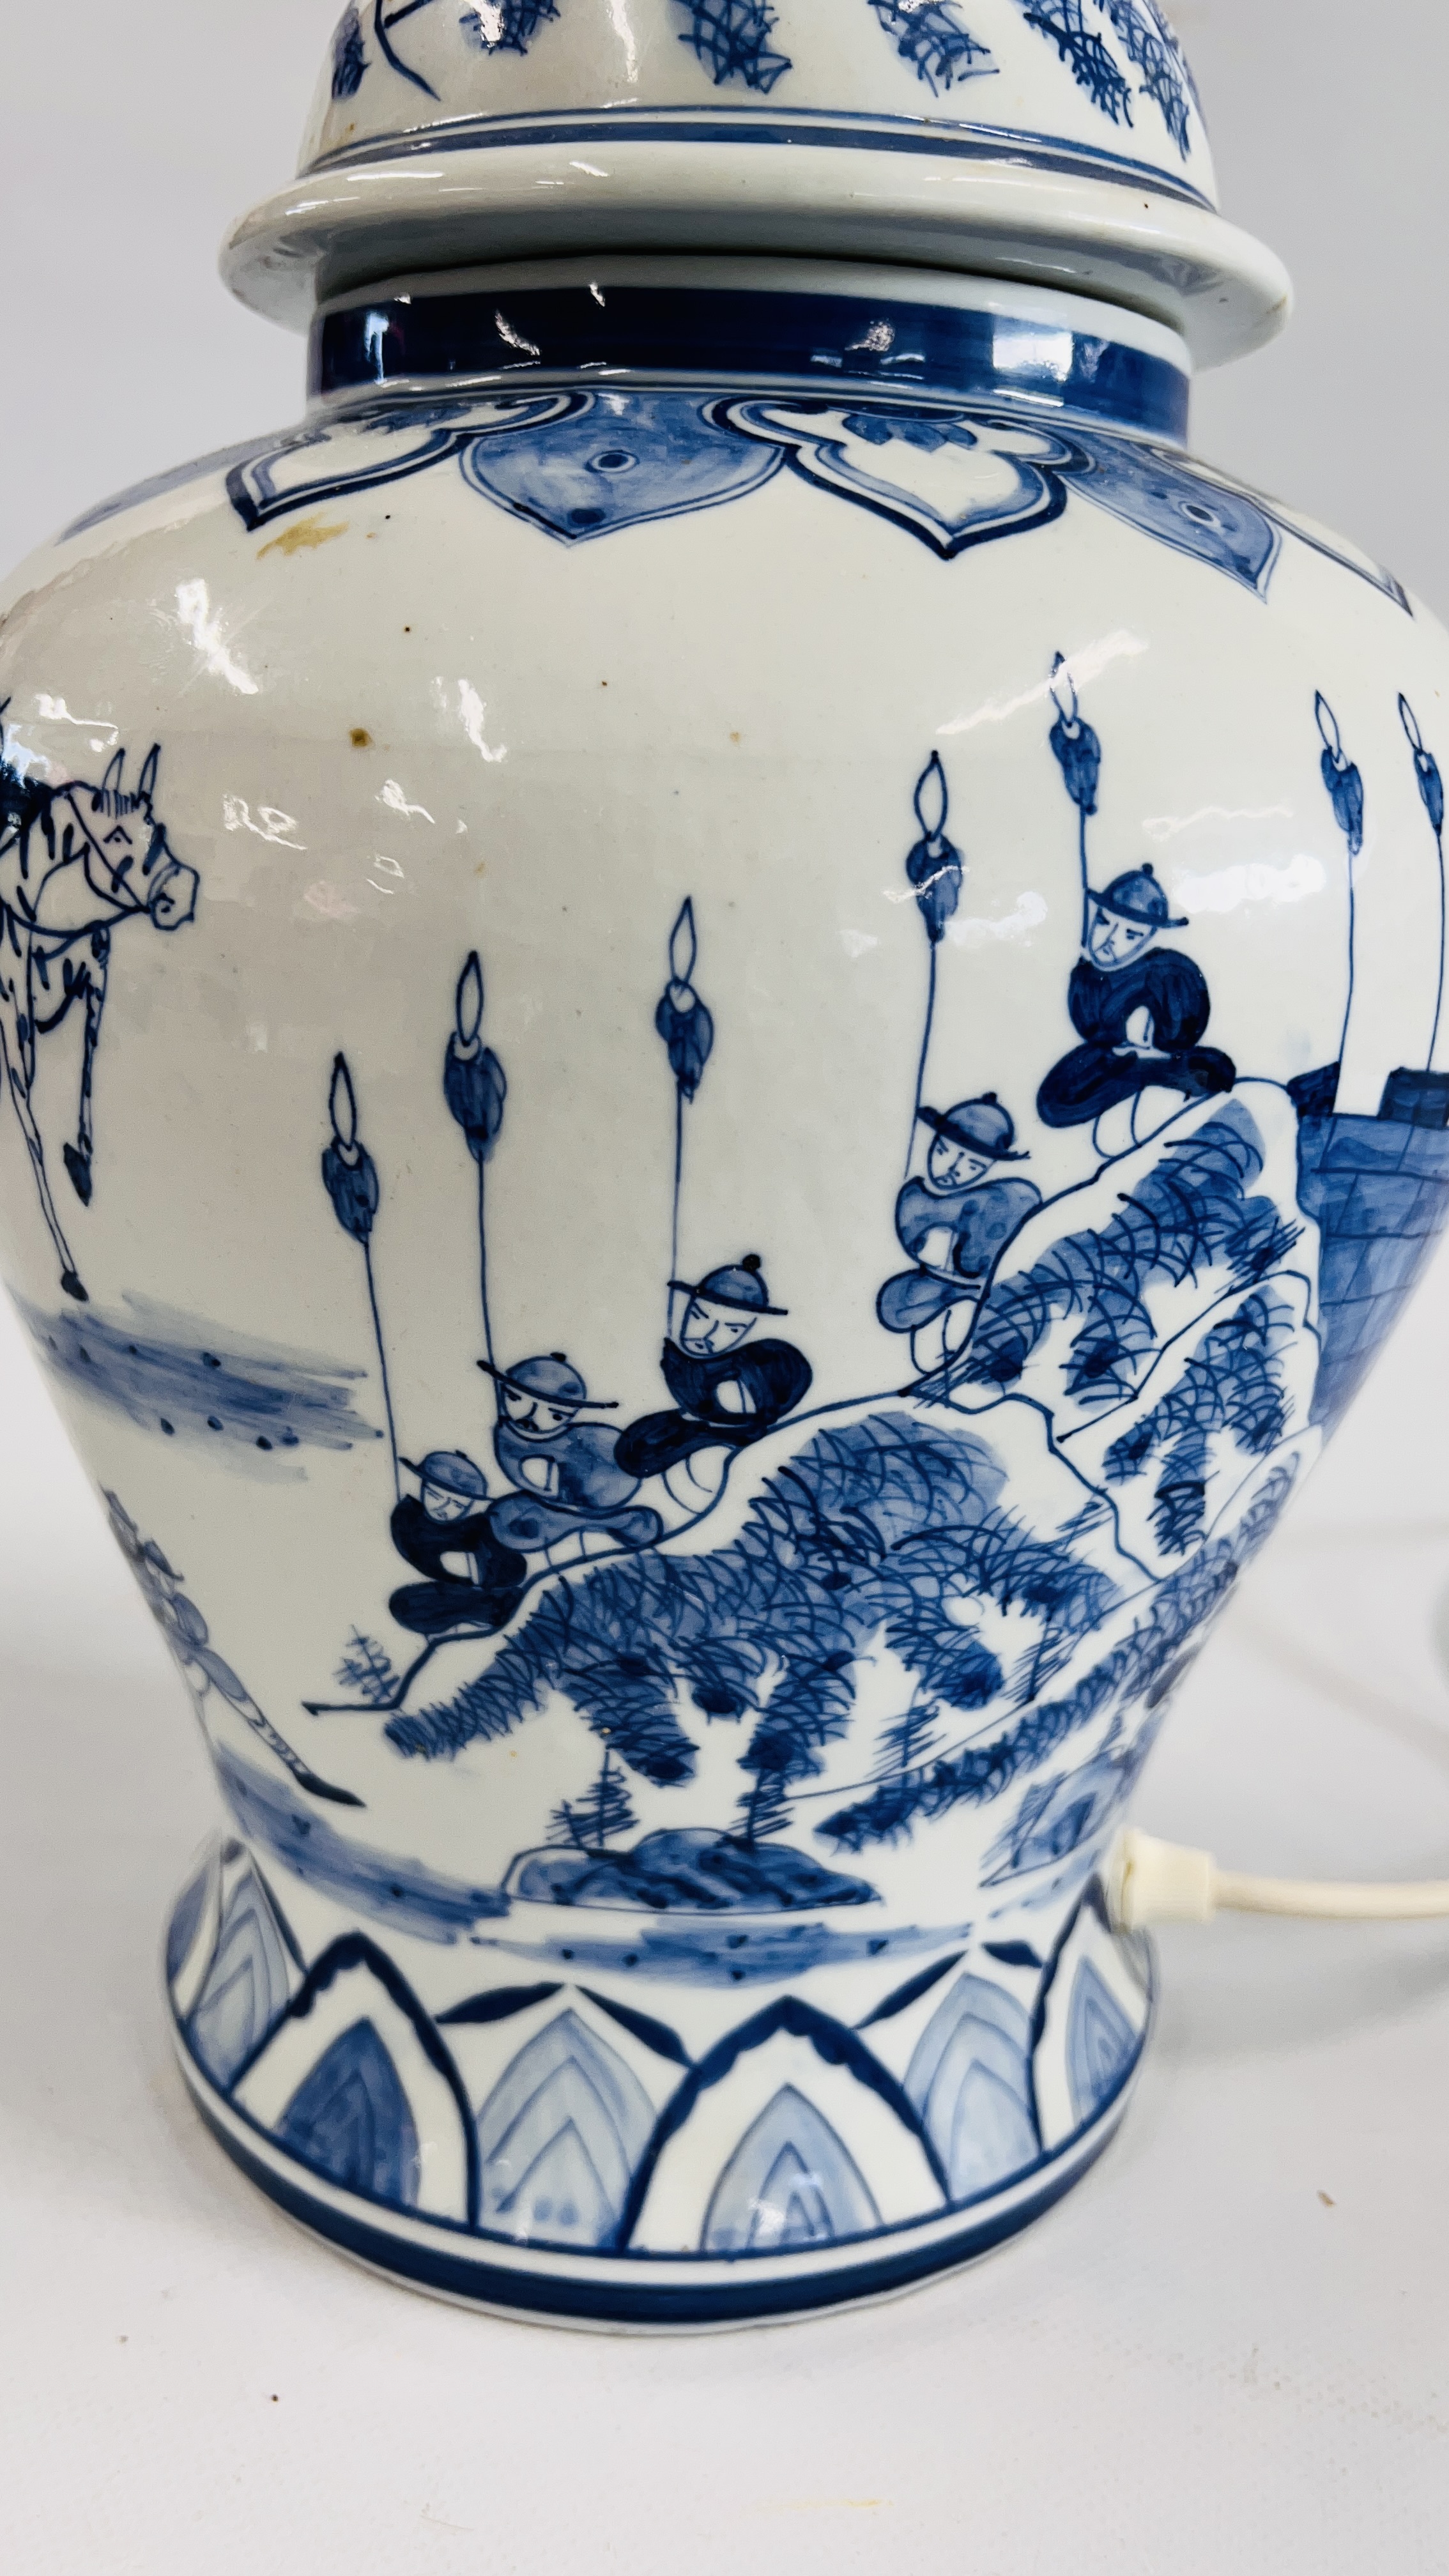 A VINTAGE STYLE BLUE AND WHITE ORIENTAL GINGER JAR LAMP, H 30CM - SOLD AS SEEN. - Image 4 of 6